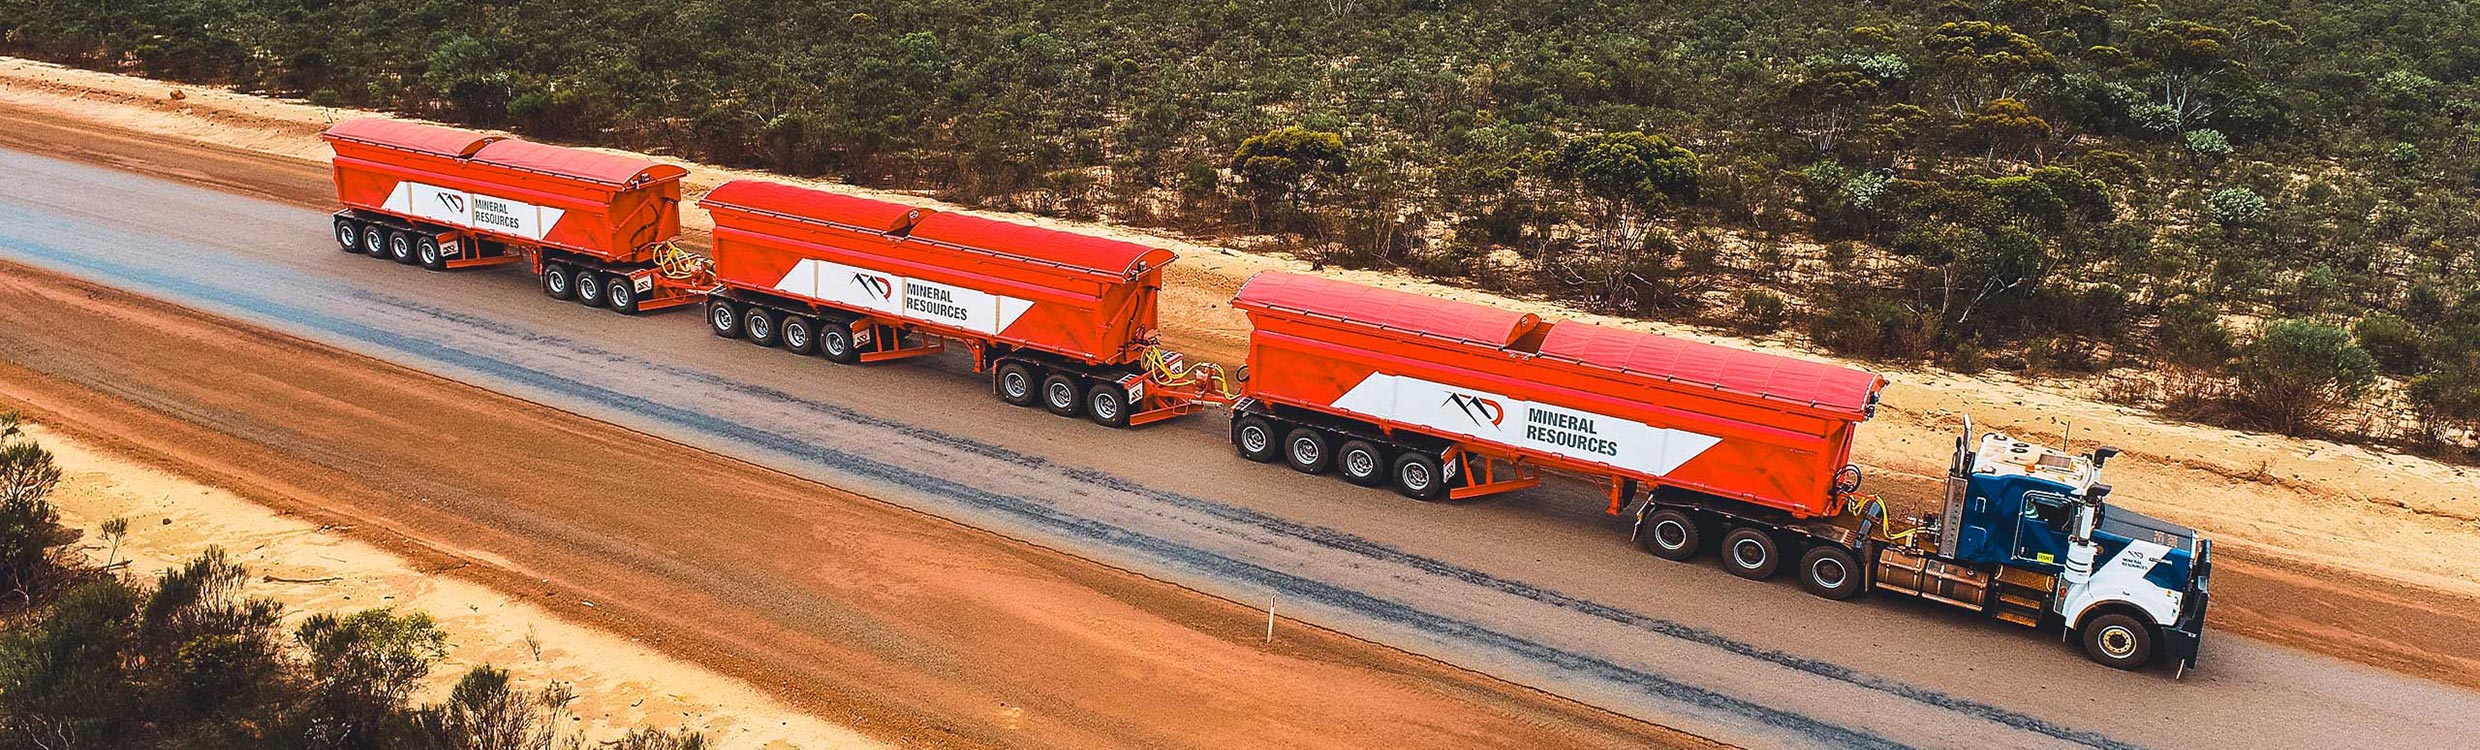 Photo of road train from above and to the side